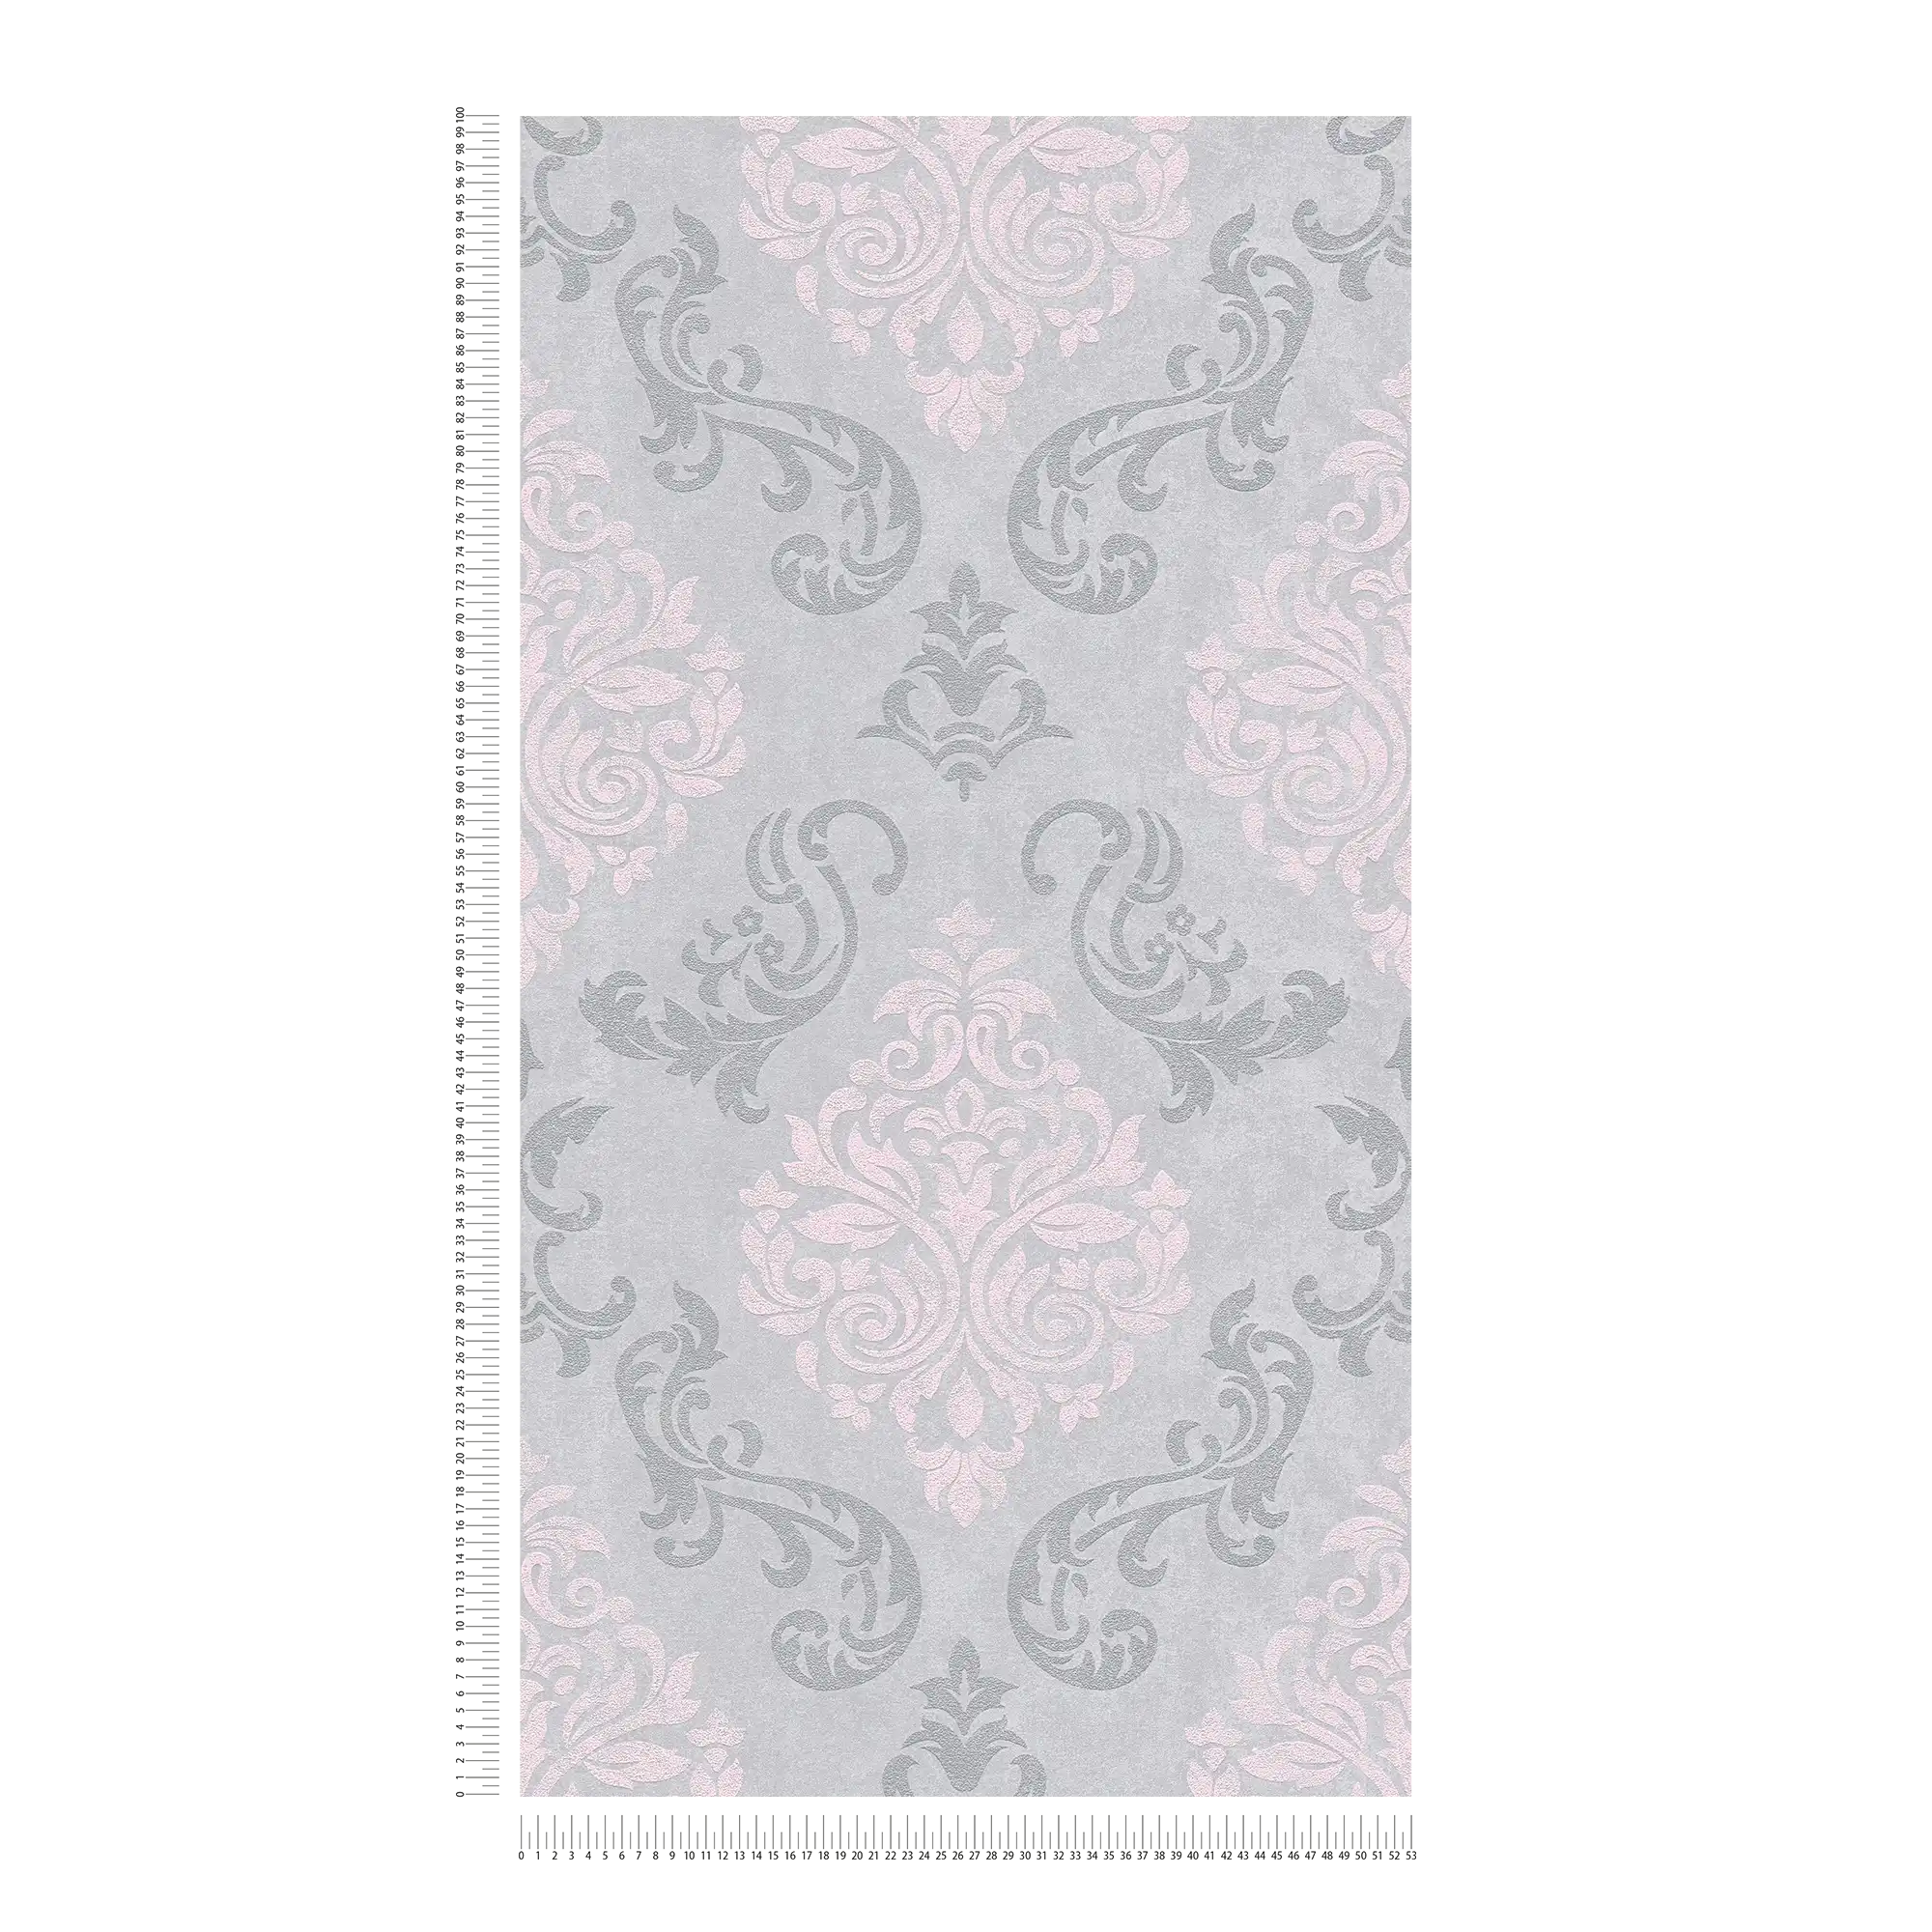             Ornaments wallpaper baroque style with glitter effect - grey, metallic, pink
        